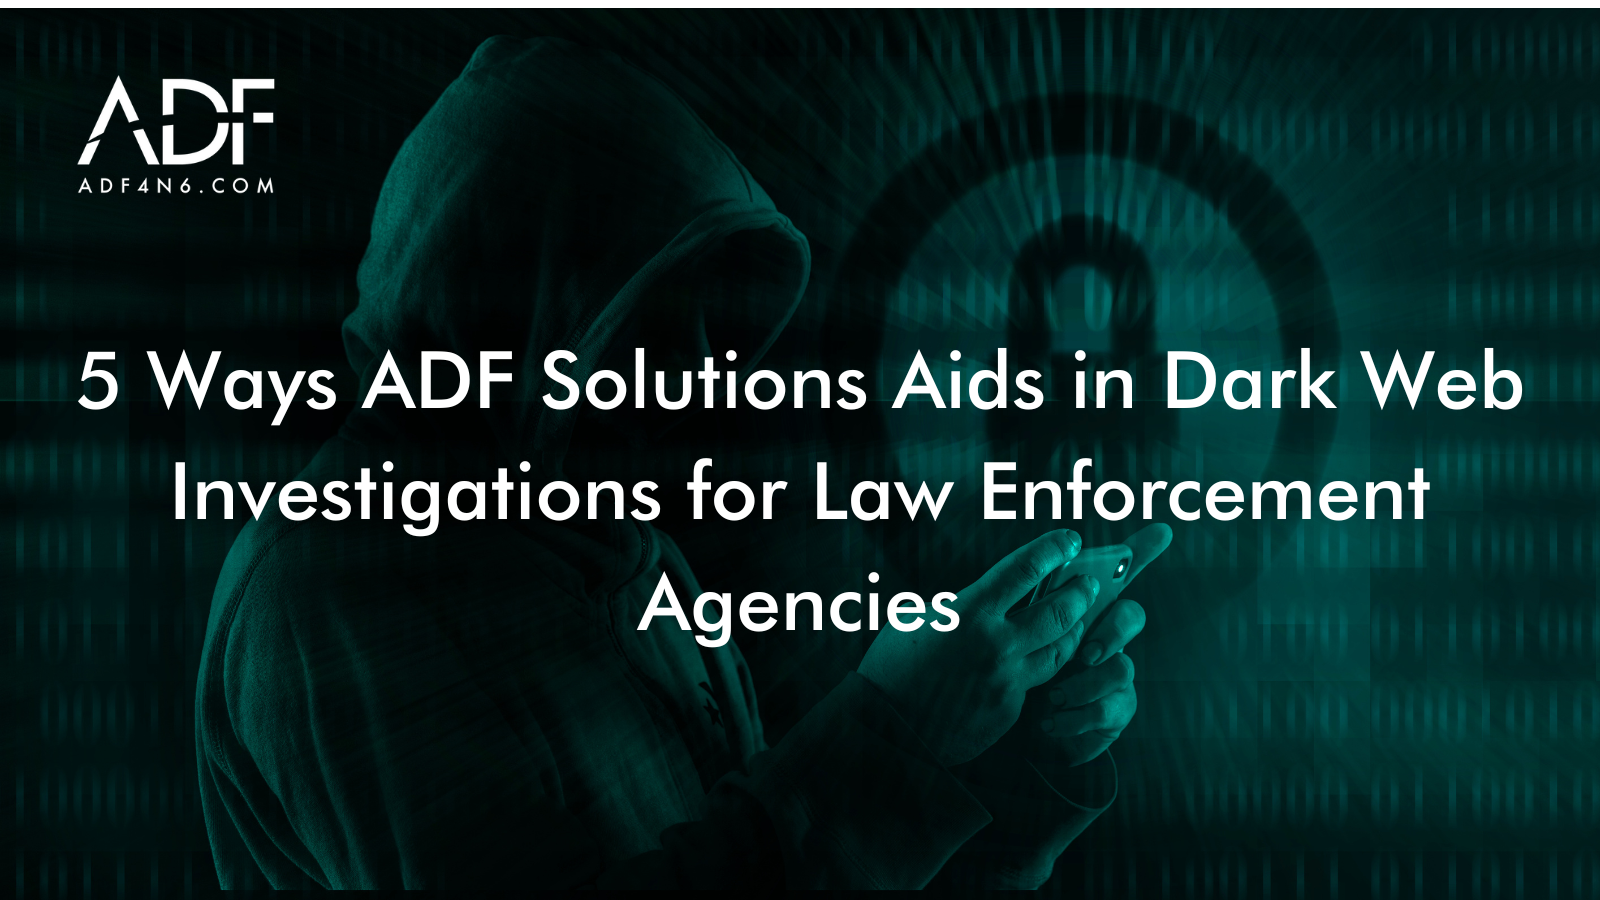 ADF Solutions: 5 Ways to Conduct Dark Web Investigations